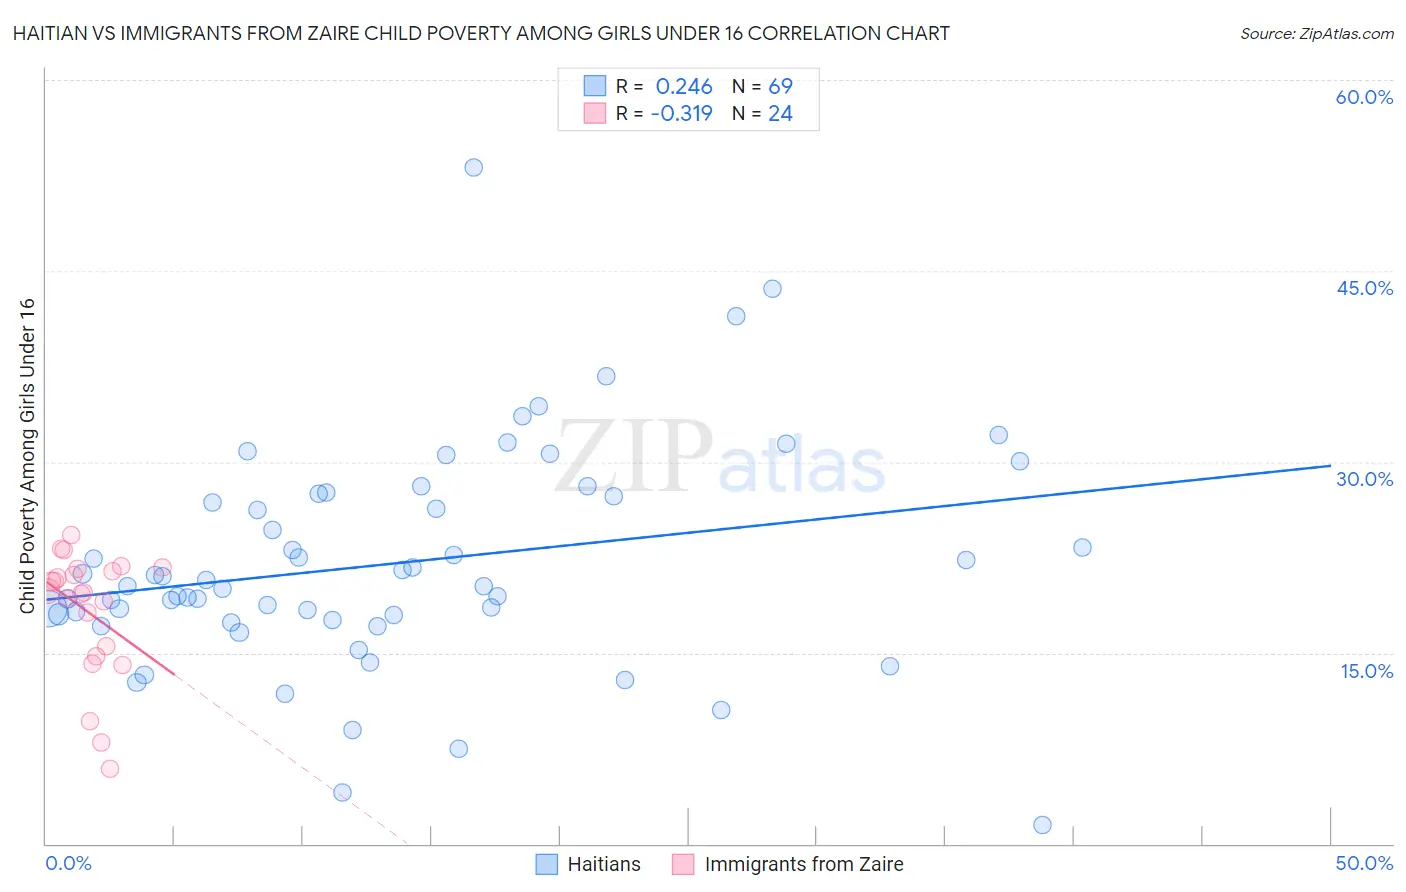 Haitian vs Immigrants from Zaire Child Poverty Among Girls Under 16